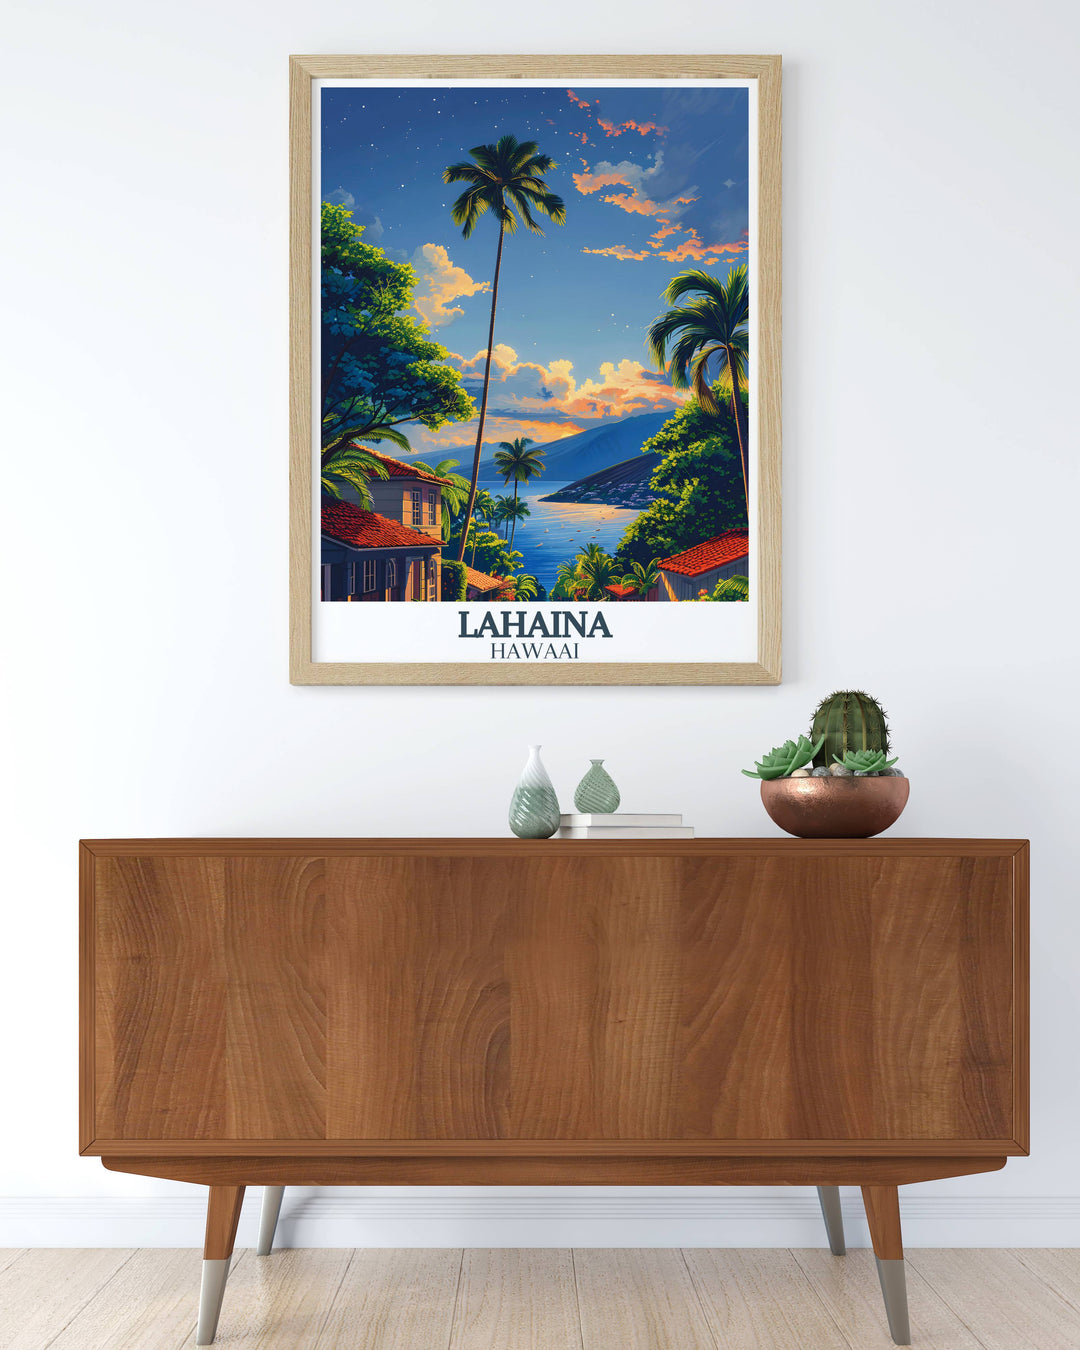 Tropical scene on a Lahaina Maui poster highlighting the serene ocean view and sunset perfect for a Hawaii gift.